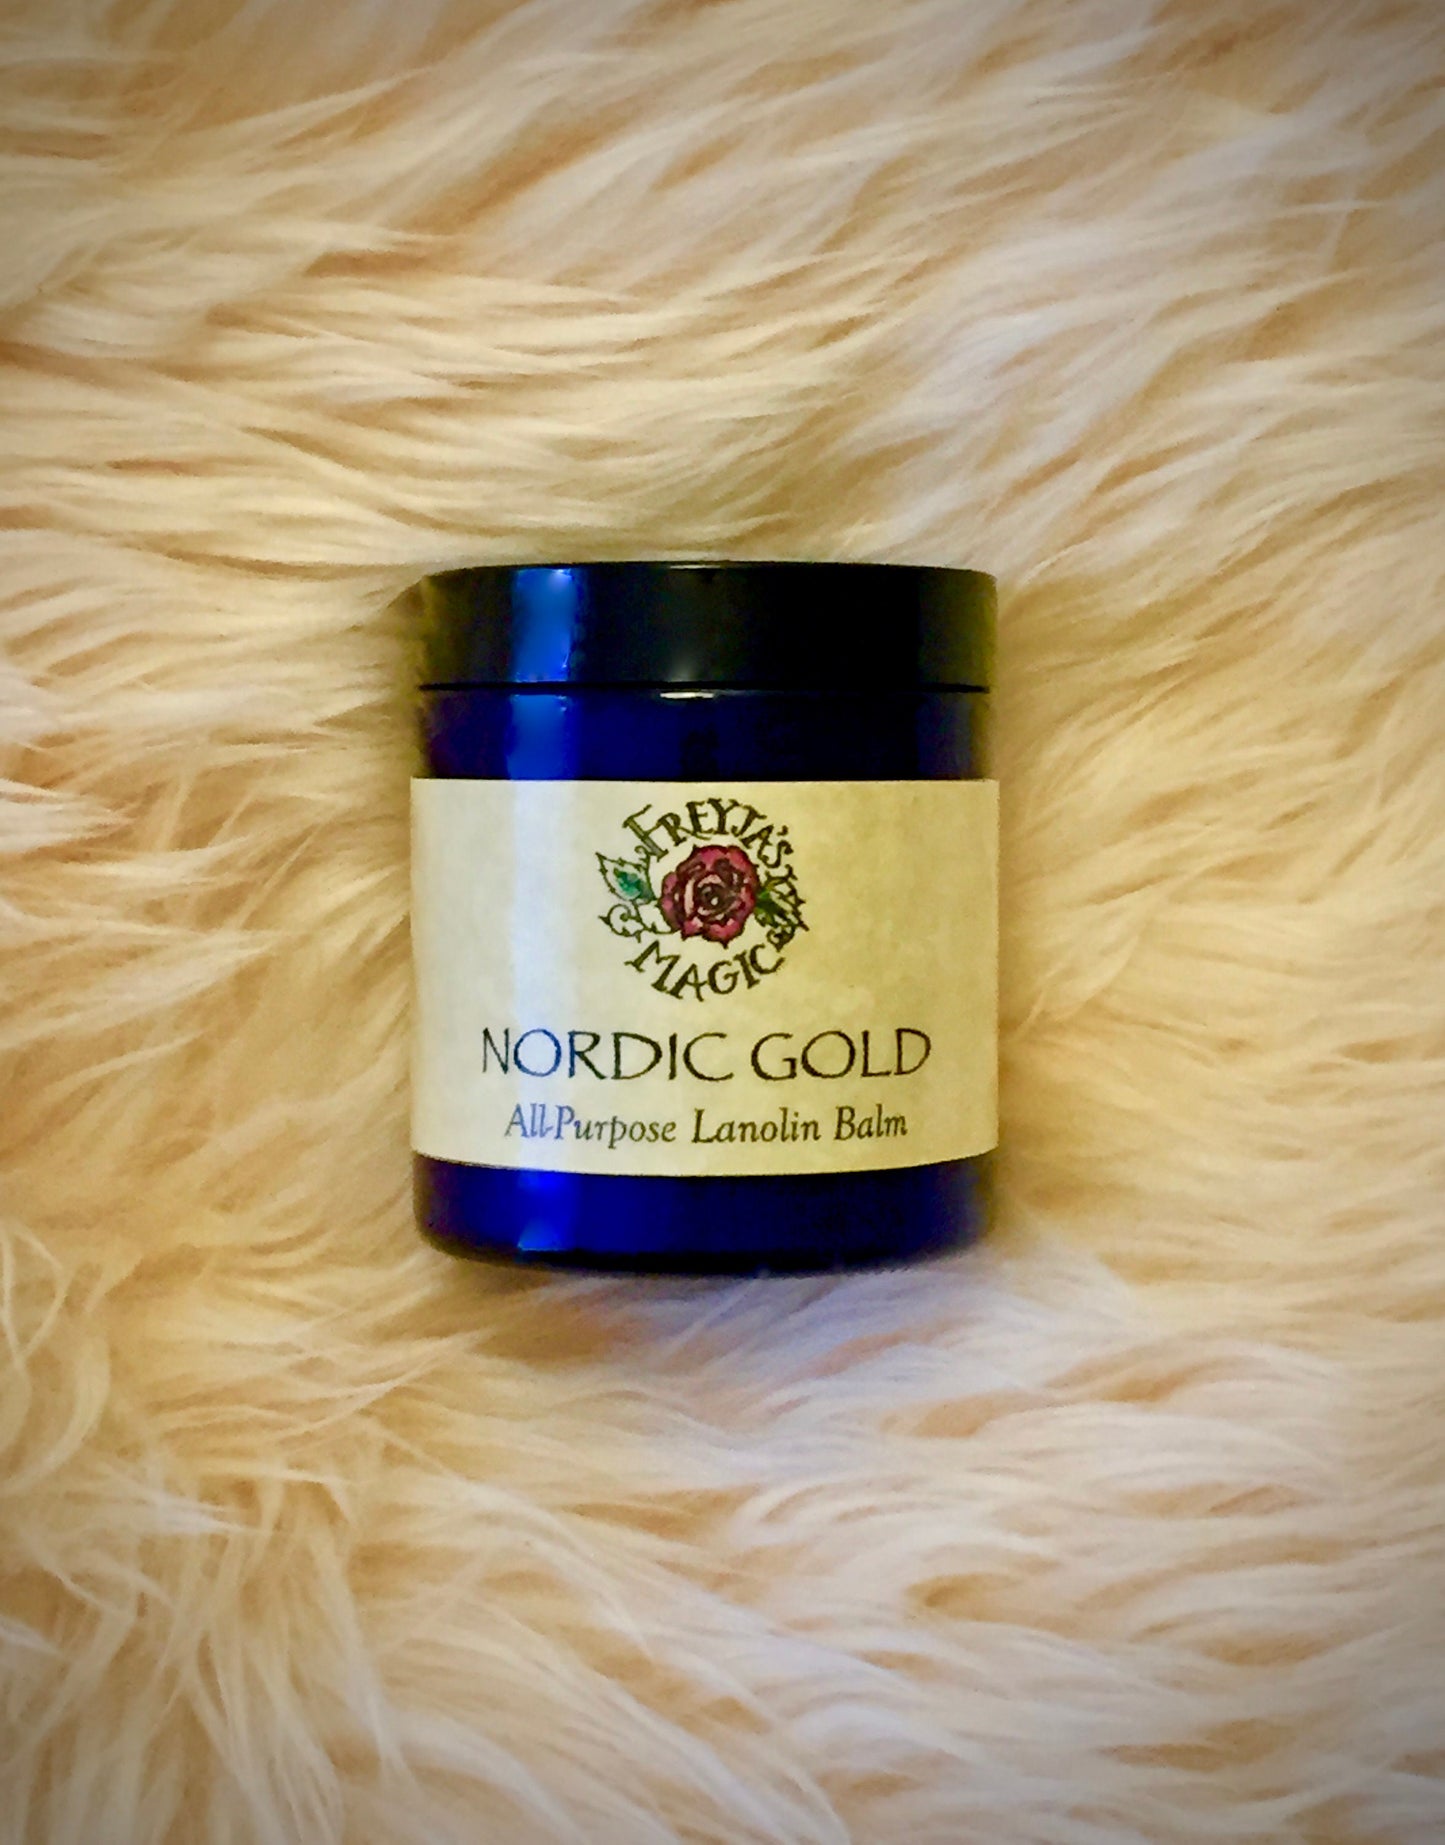 Lanolin Balm | Nordic Gold All Purpose Hand & Foot Balm | All Weather Skin Protection | Hard Working Hand Balm | Skin Balm for Him and Her